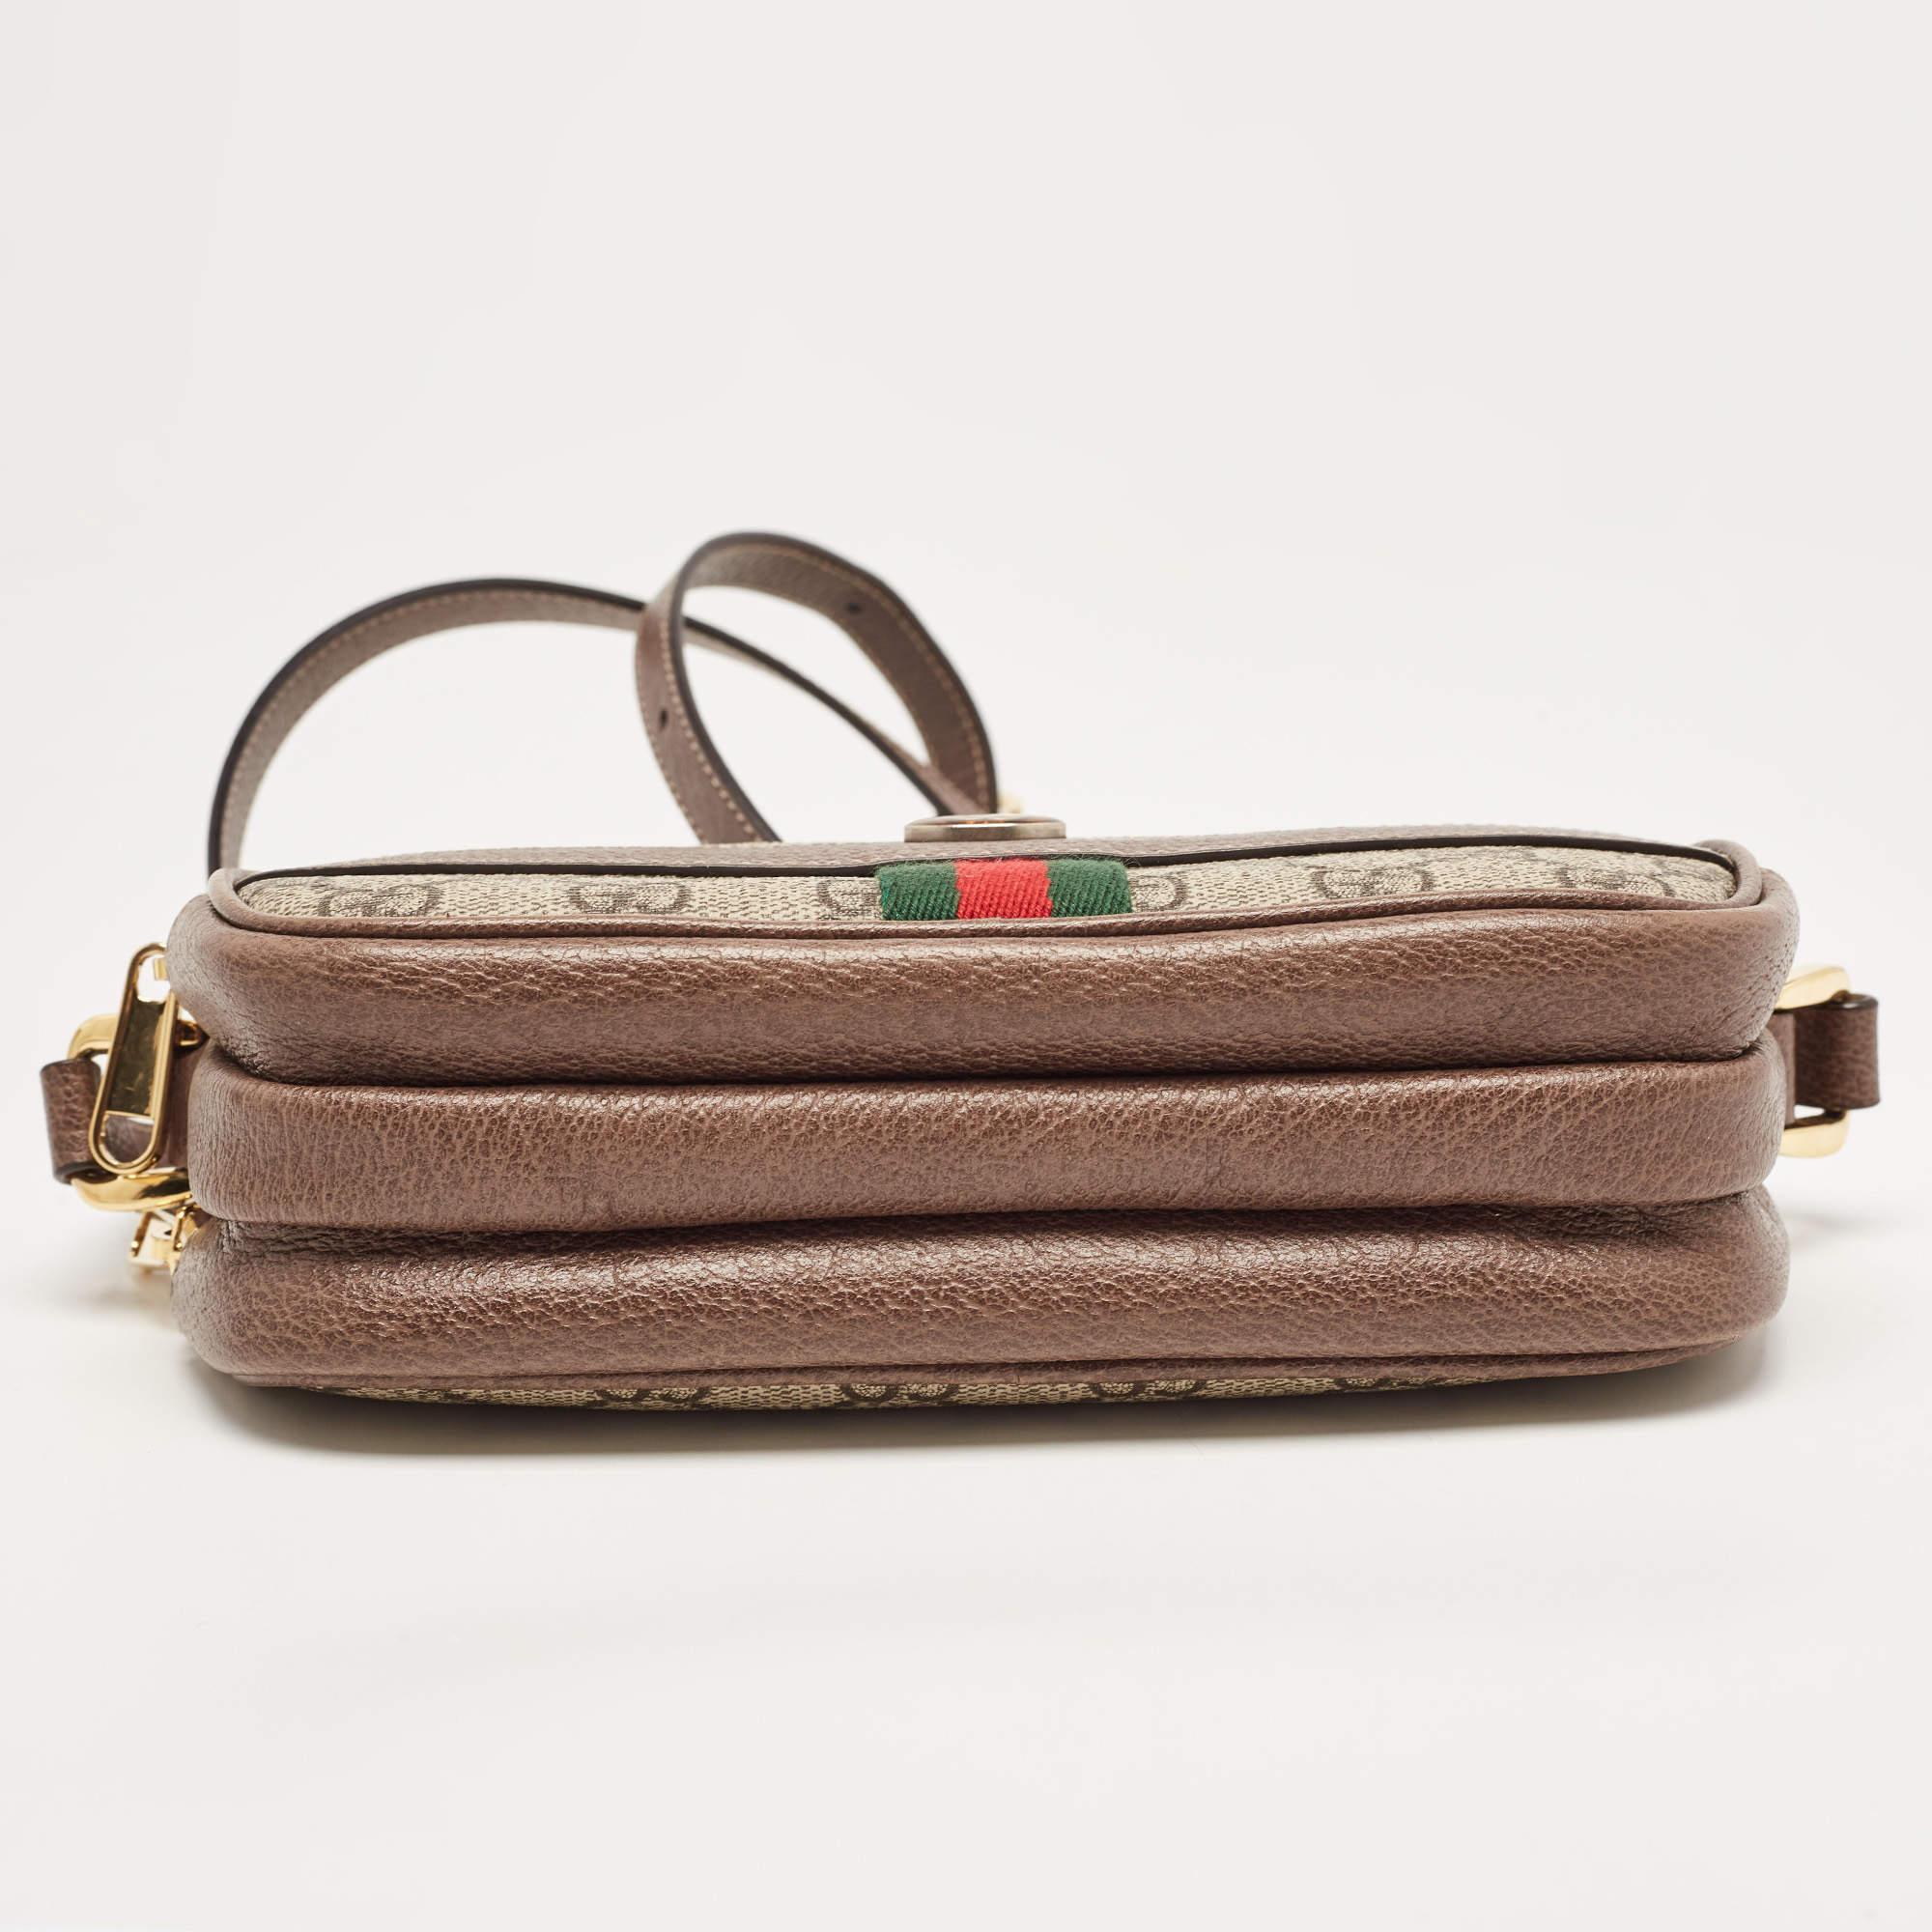 Swap that regular everyday tote with this charming crossbody bag from the house of Gucci. Sewn and assembled with care and love, the bag promises to boost your style and hold your daily essentials with great ease.

